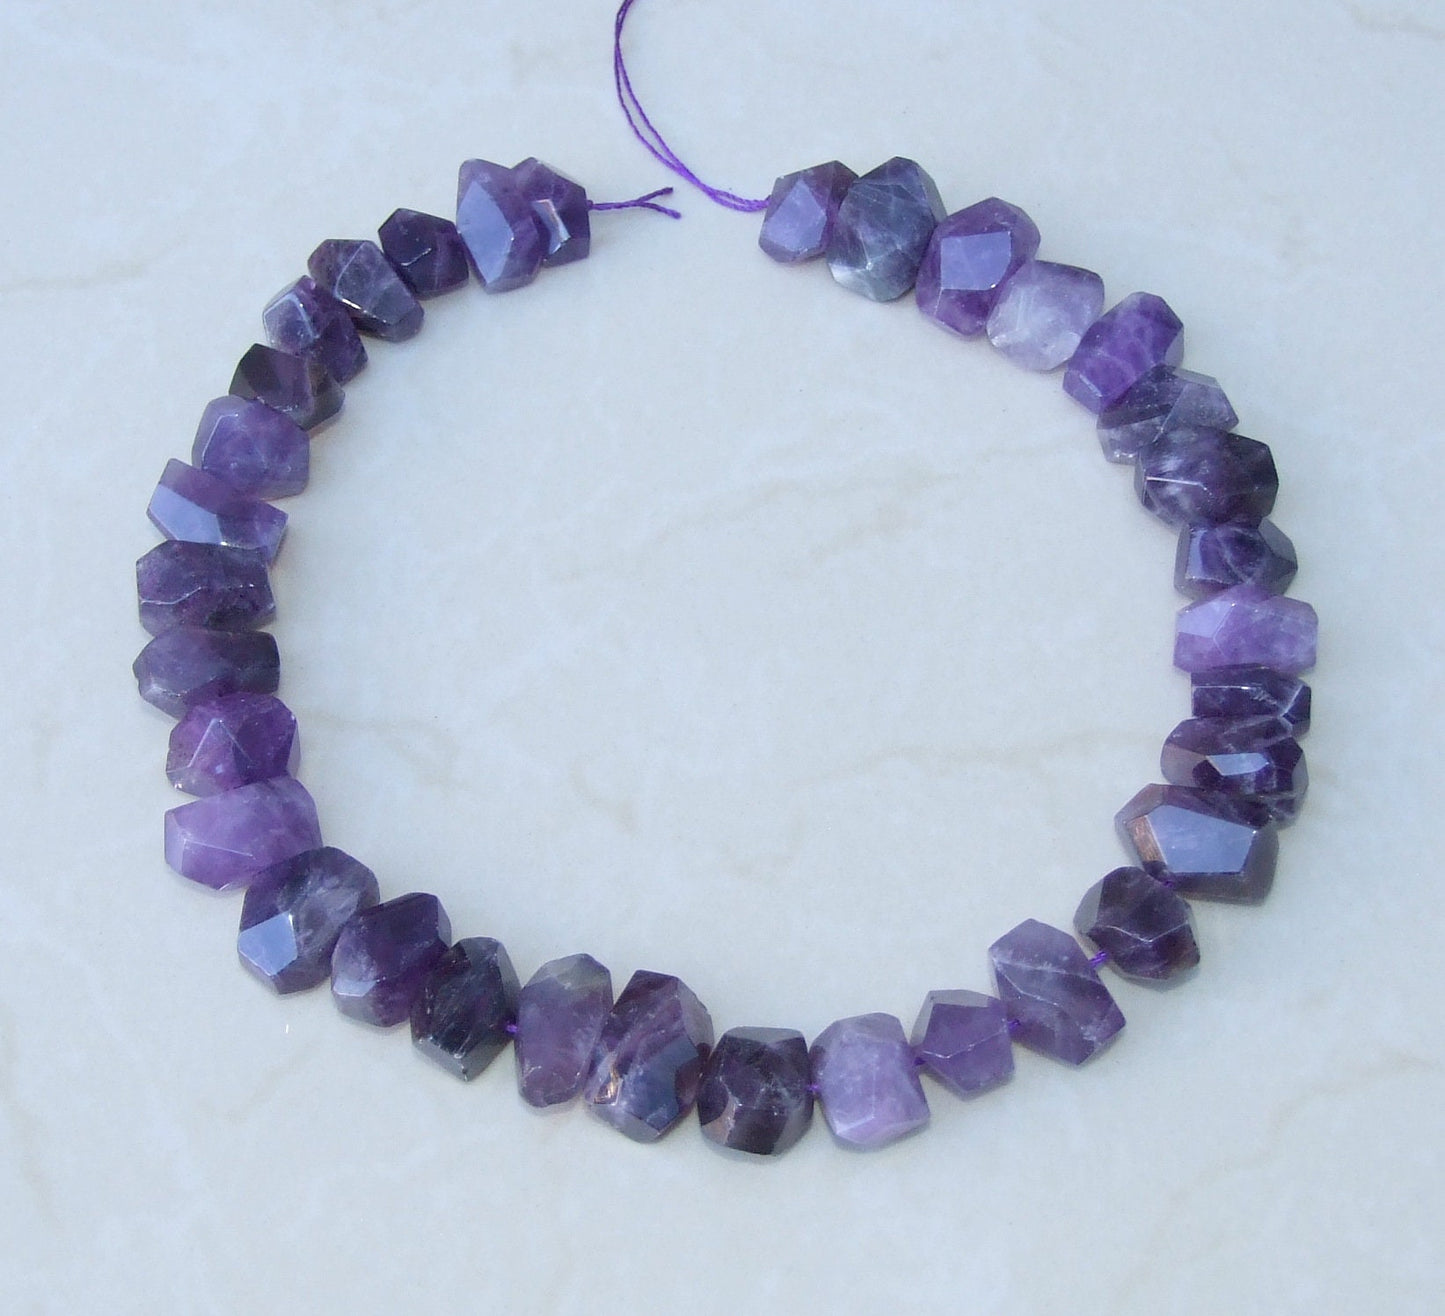 Amethyst Faceted Nugget, Polished Amethyst Beads, Gemstone Beads, Jewelry Stones, Amethyst Nuggets, Half Strand - 12mm x 12mm x 20mm